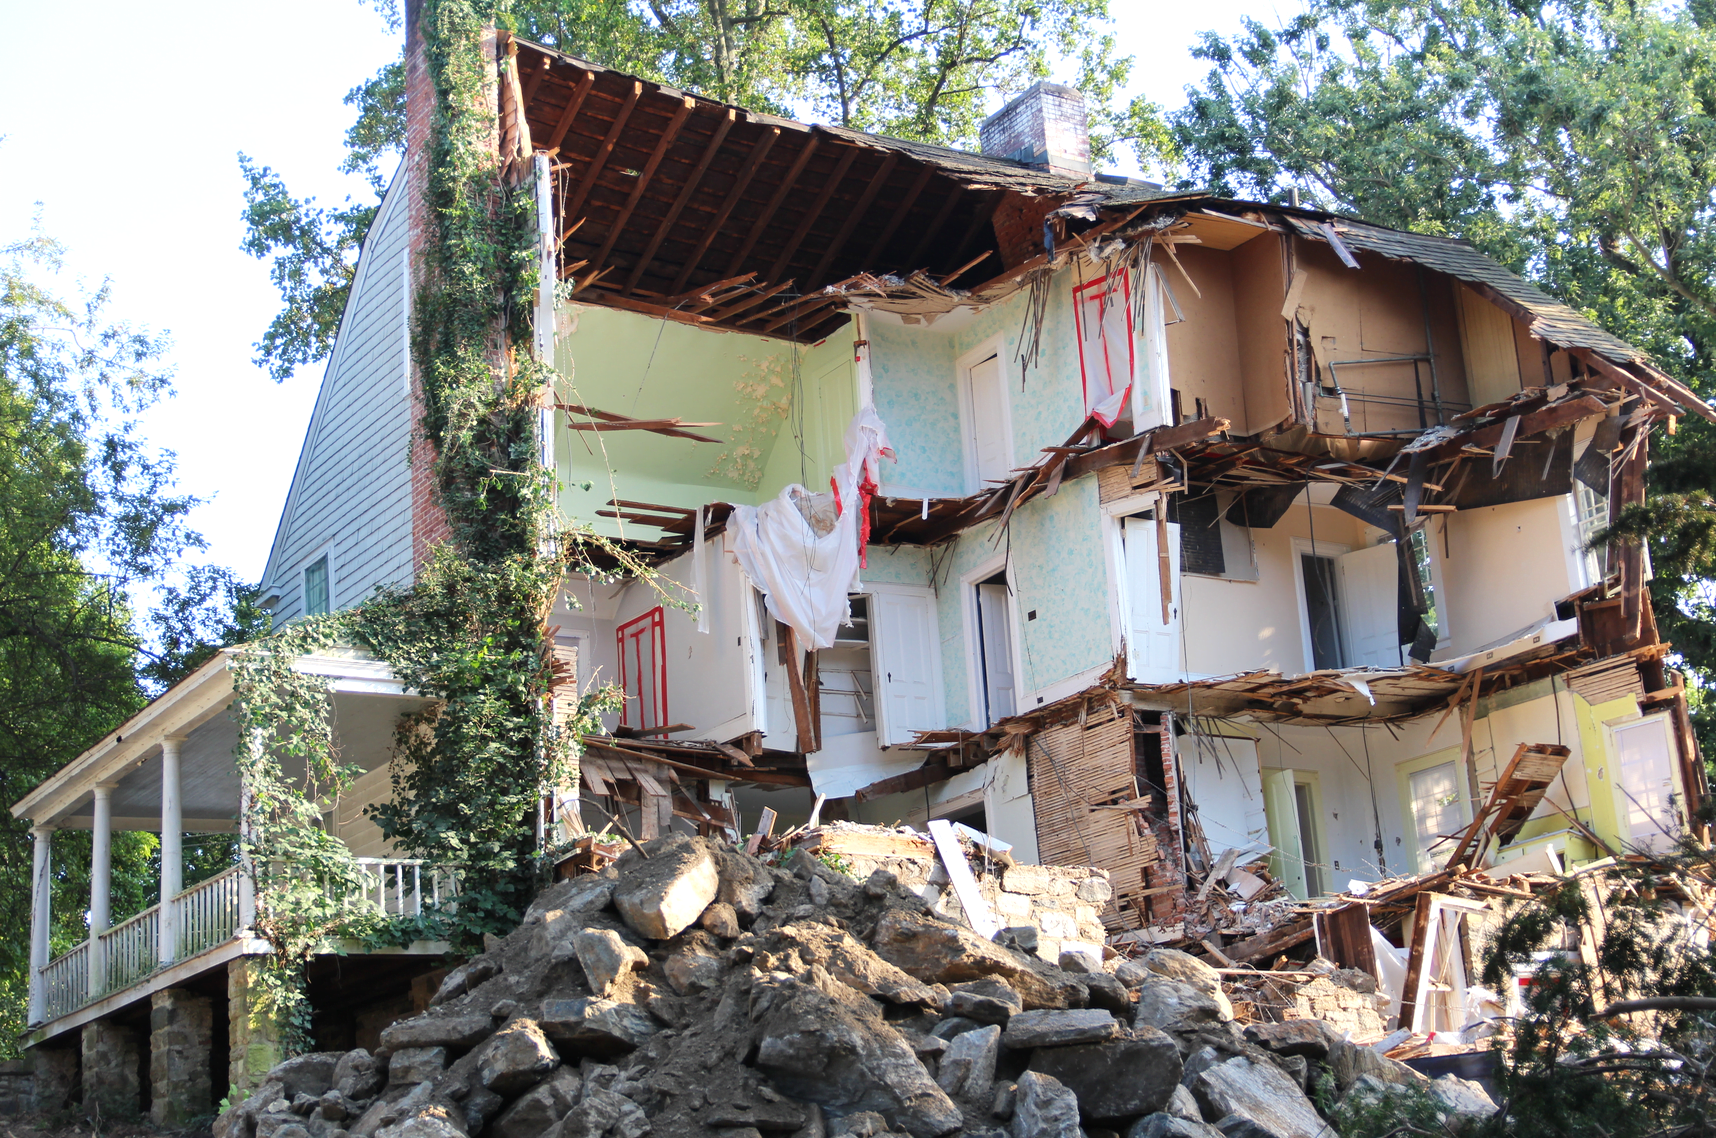 Demolition of the "ghost house" at 2 Patterson property, owned by Greenwich Academy. Aug 20, 2019. Photo: Leslie Yager